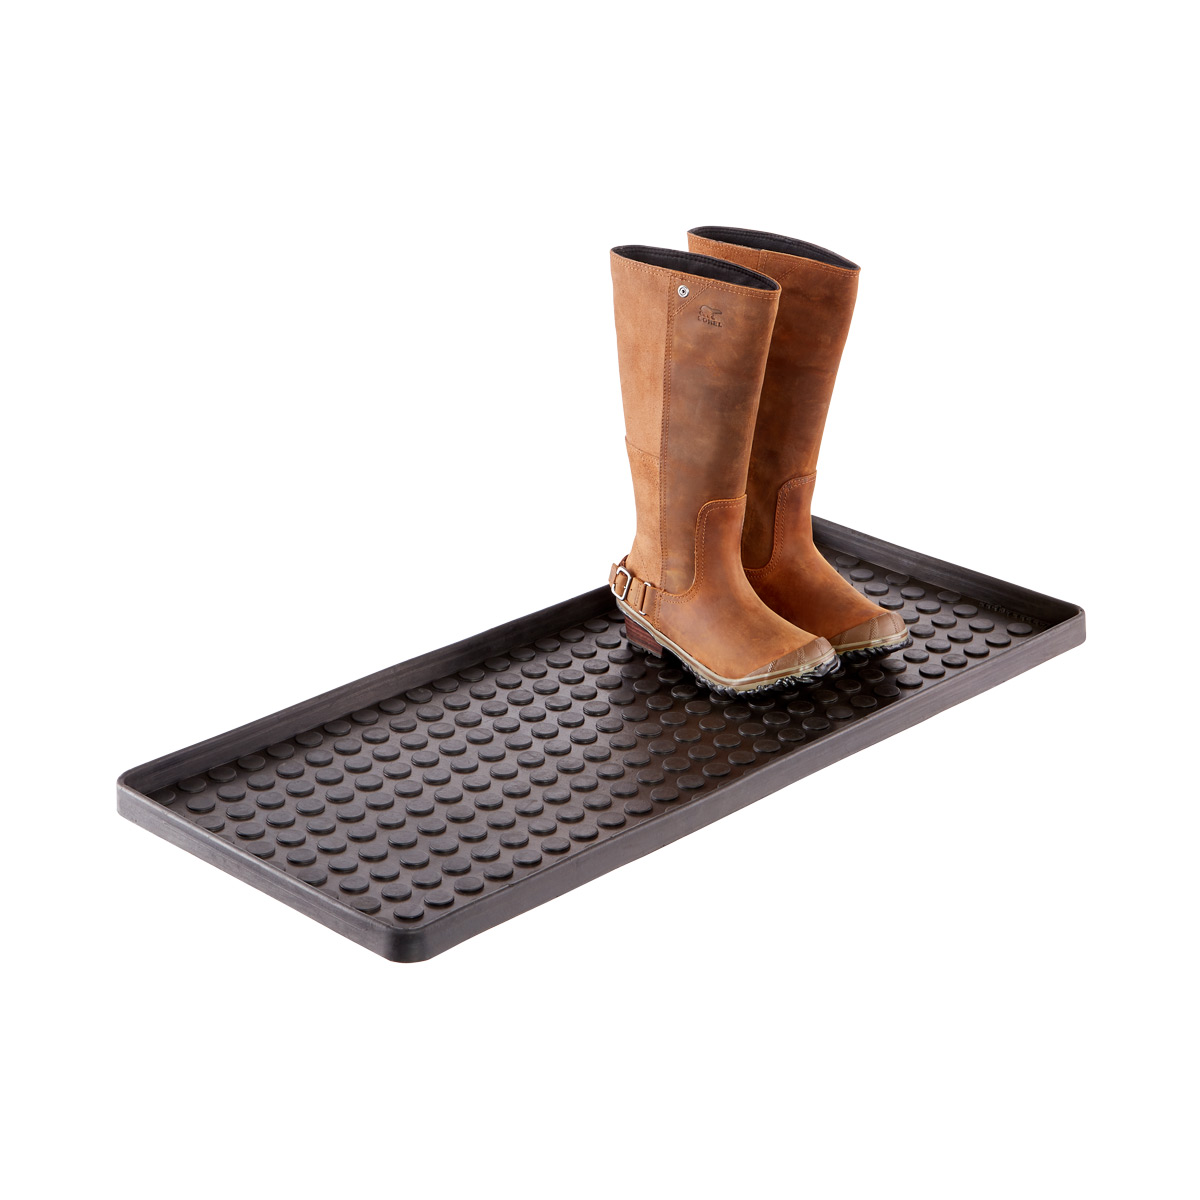 https://www.containerstore.com/catalogimages/323247/10072817-LARGE-SHOE-AND-BOOT-TRAY-DO.jpg